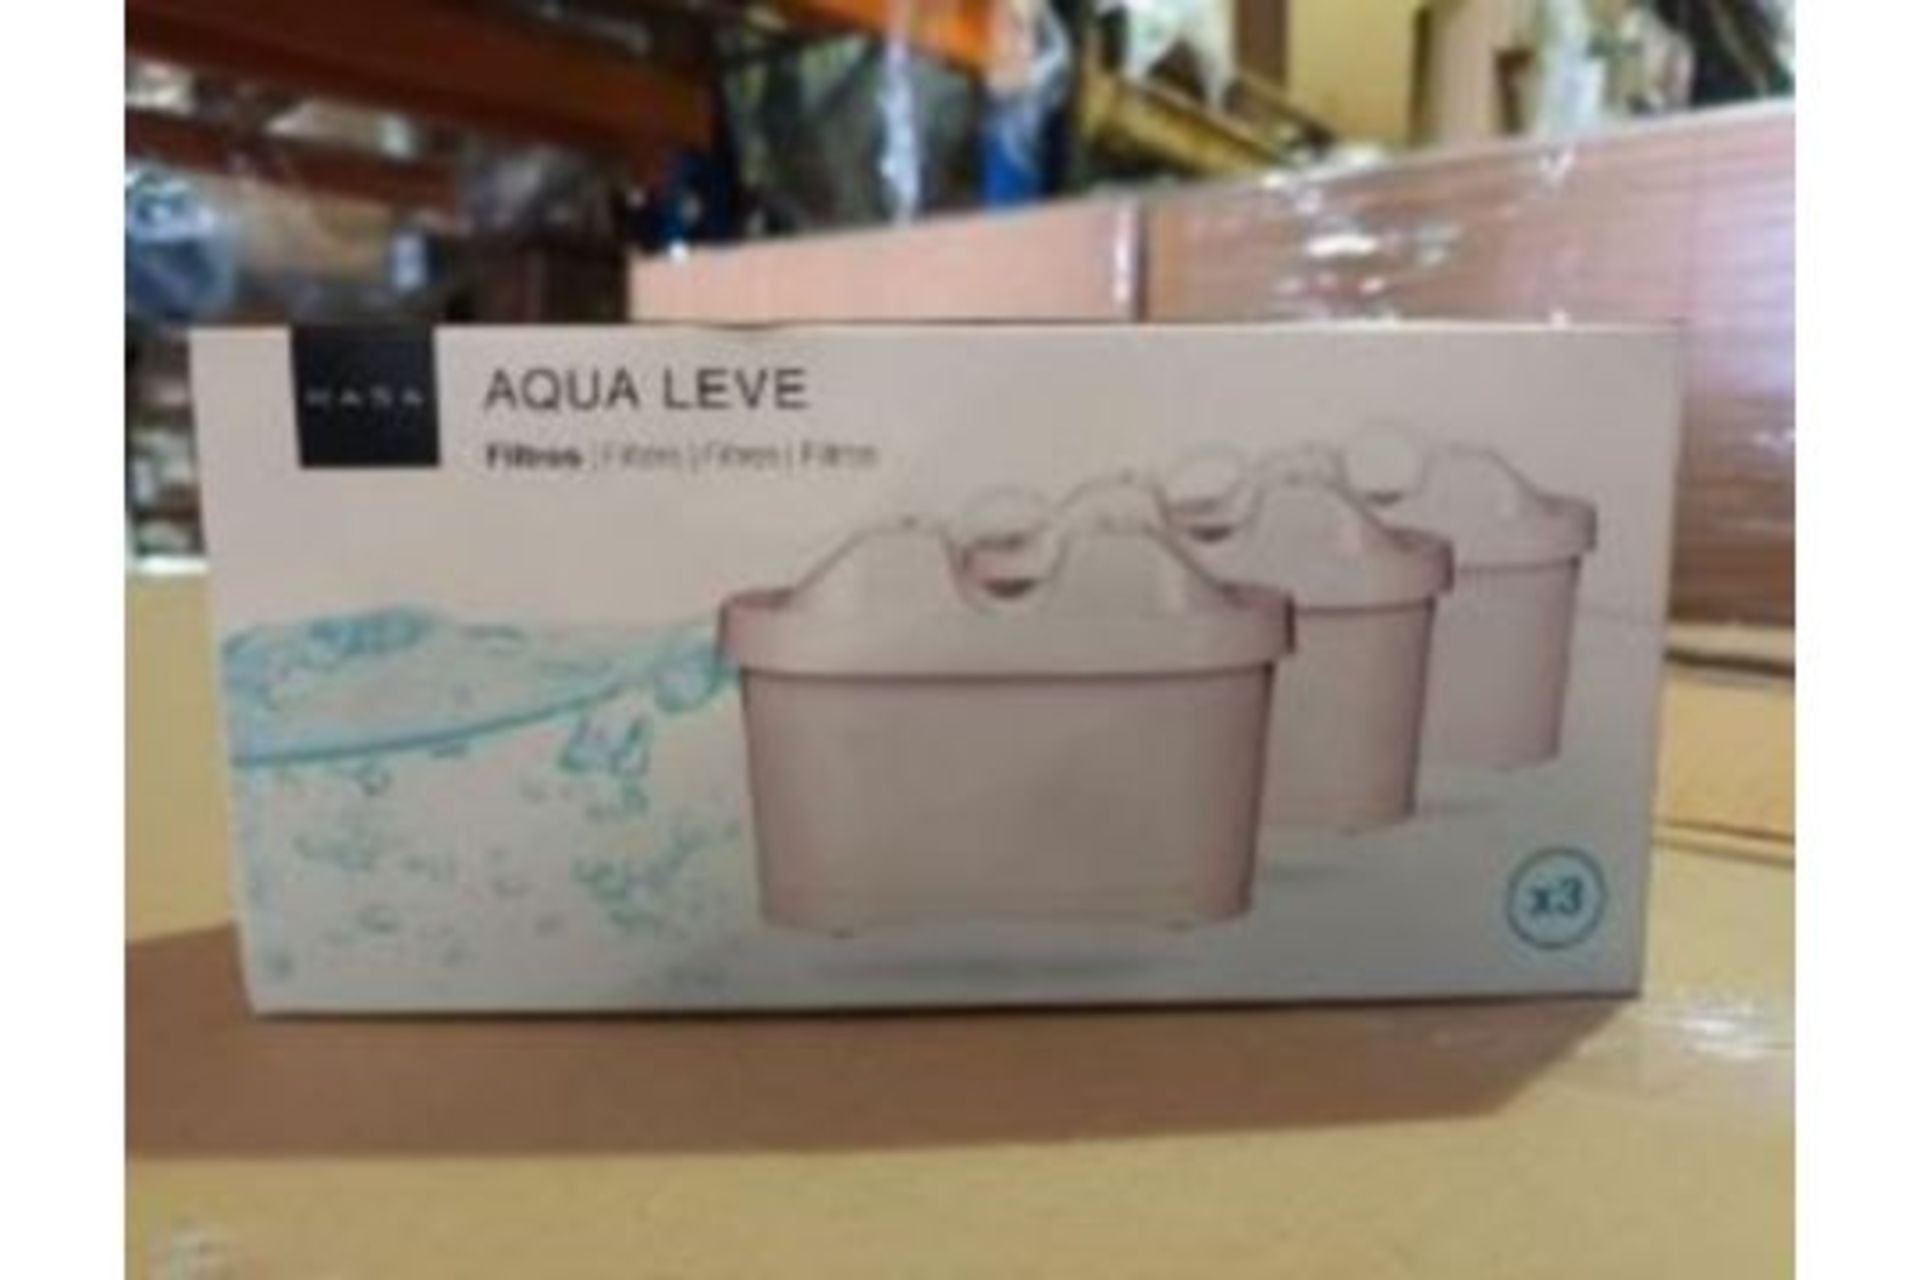 20 x New Boxed Sets of 3 Kasa Aqua Leve Water Filters. (Total of 60 Filters Within This Lot)